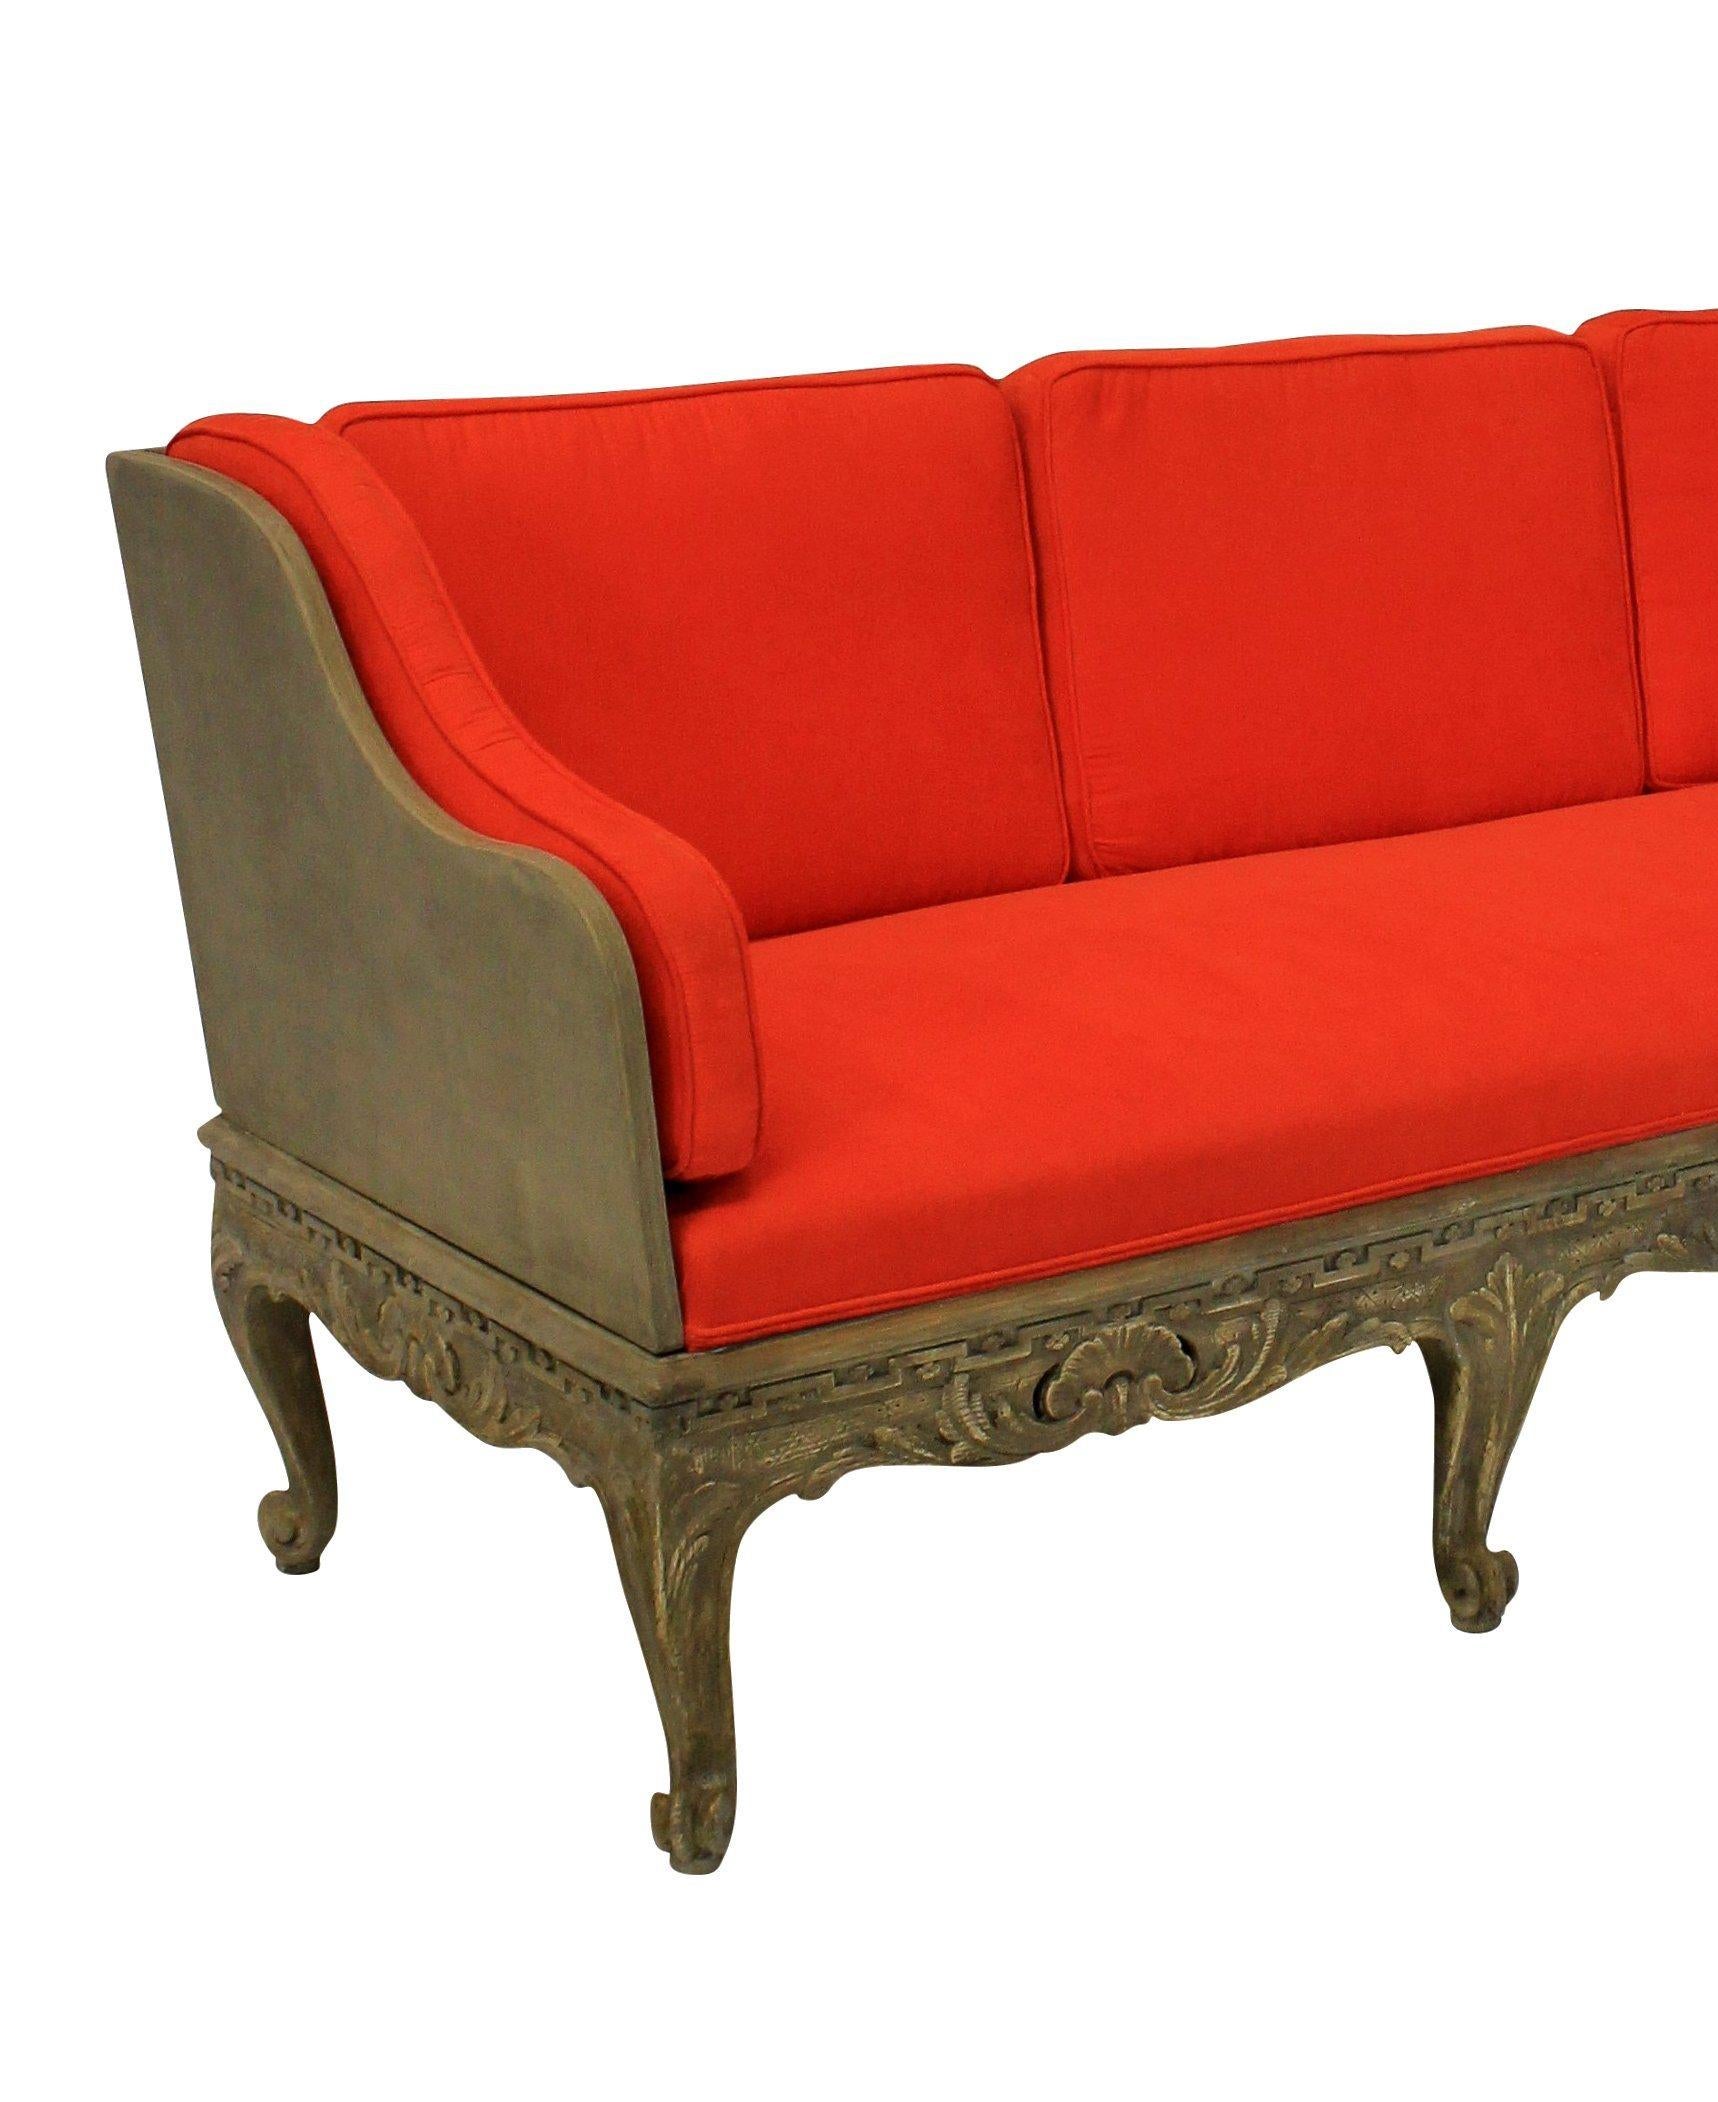 Early 20th Century Large Swedish Carved and Painted Day Bed or Settee with Removable Back